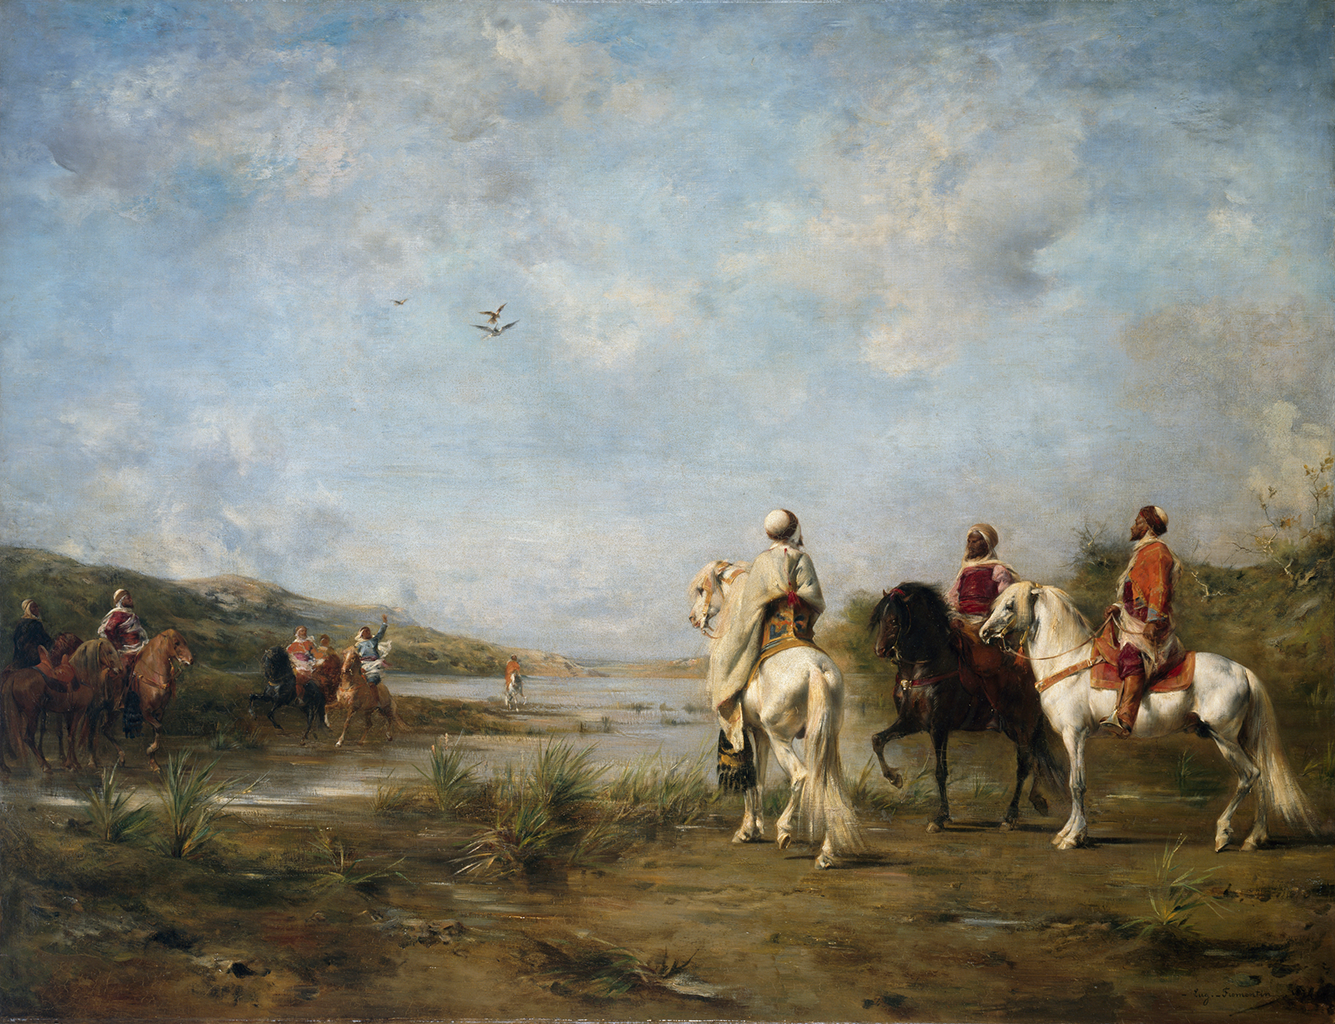 A painting of a group of men, who are wearing cloaks and headdresses in white, blue, and shades of red clothing, riding their horses through a grass field near a large body of water. In the blue sky above them, three birds are flying.